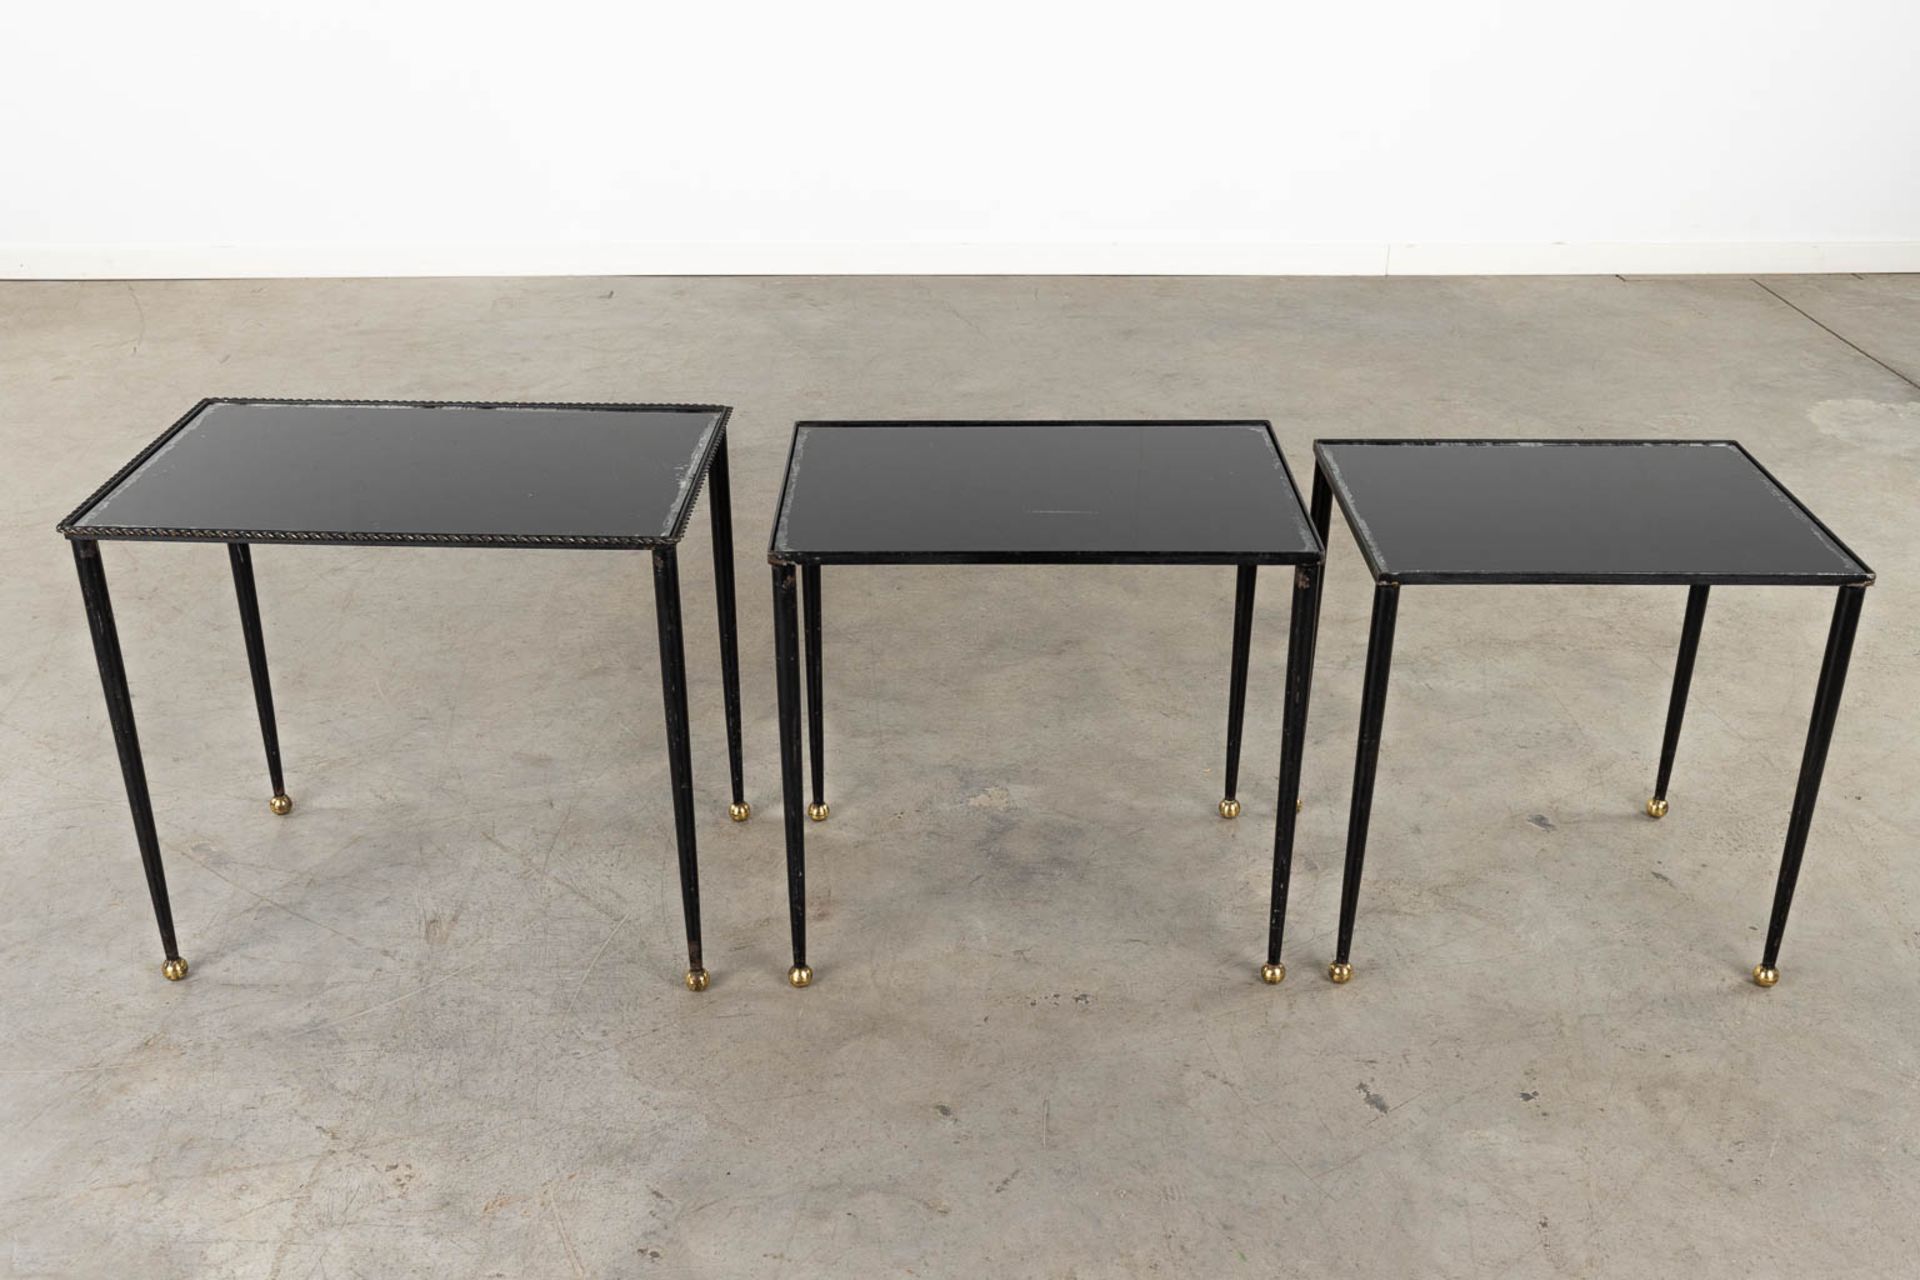 A set of Nesting tables, metal and black tinted glass. 20th C. (D:56 x W:37 x H:50 cm) - Image 4 of 10